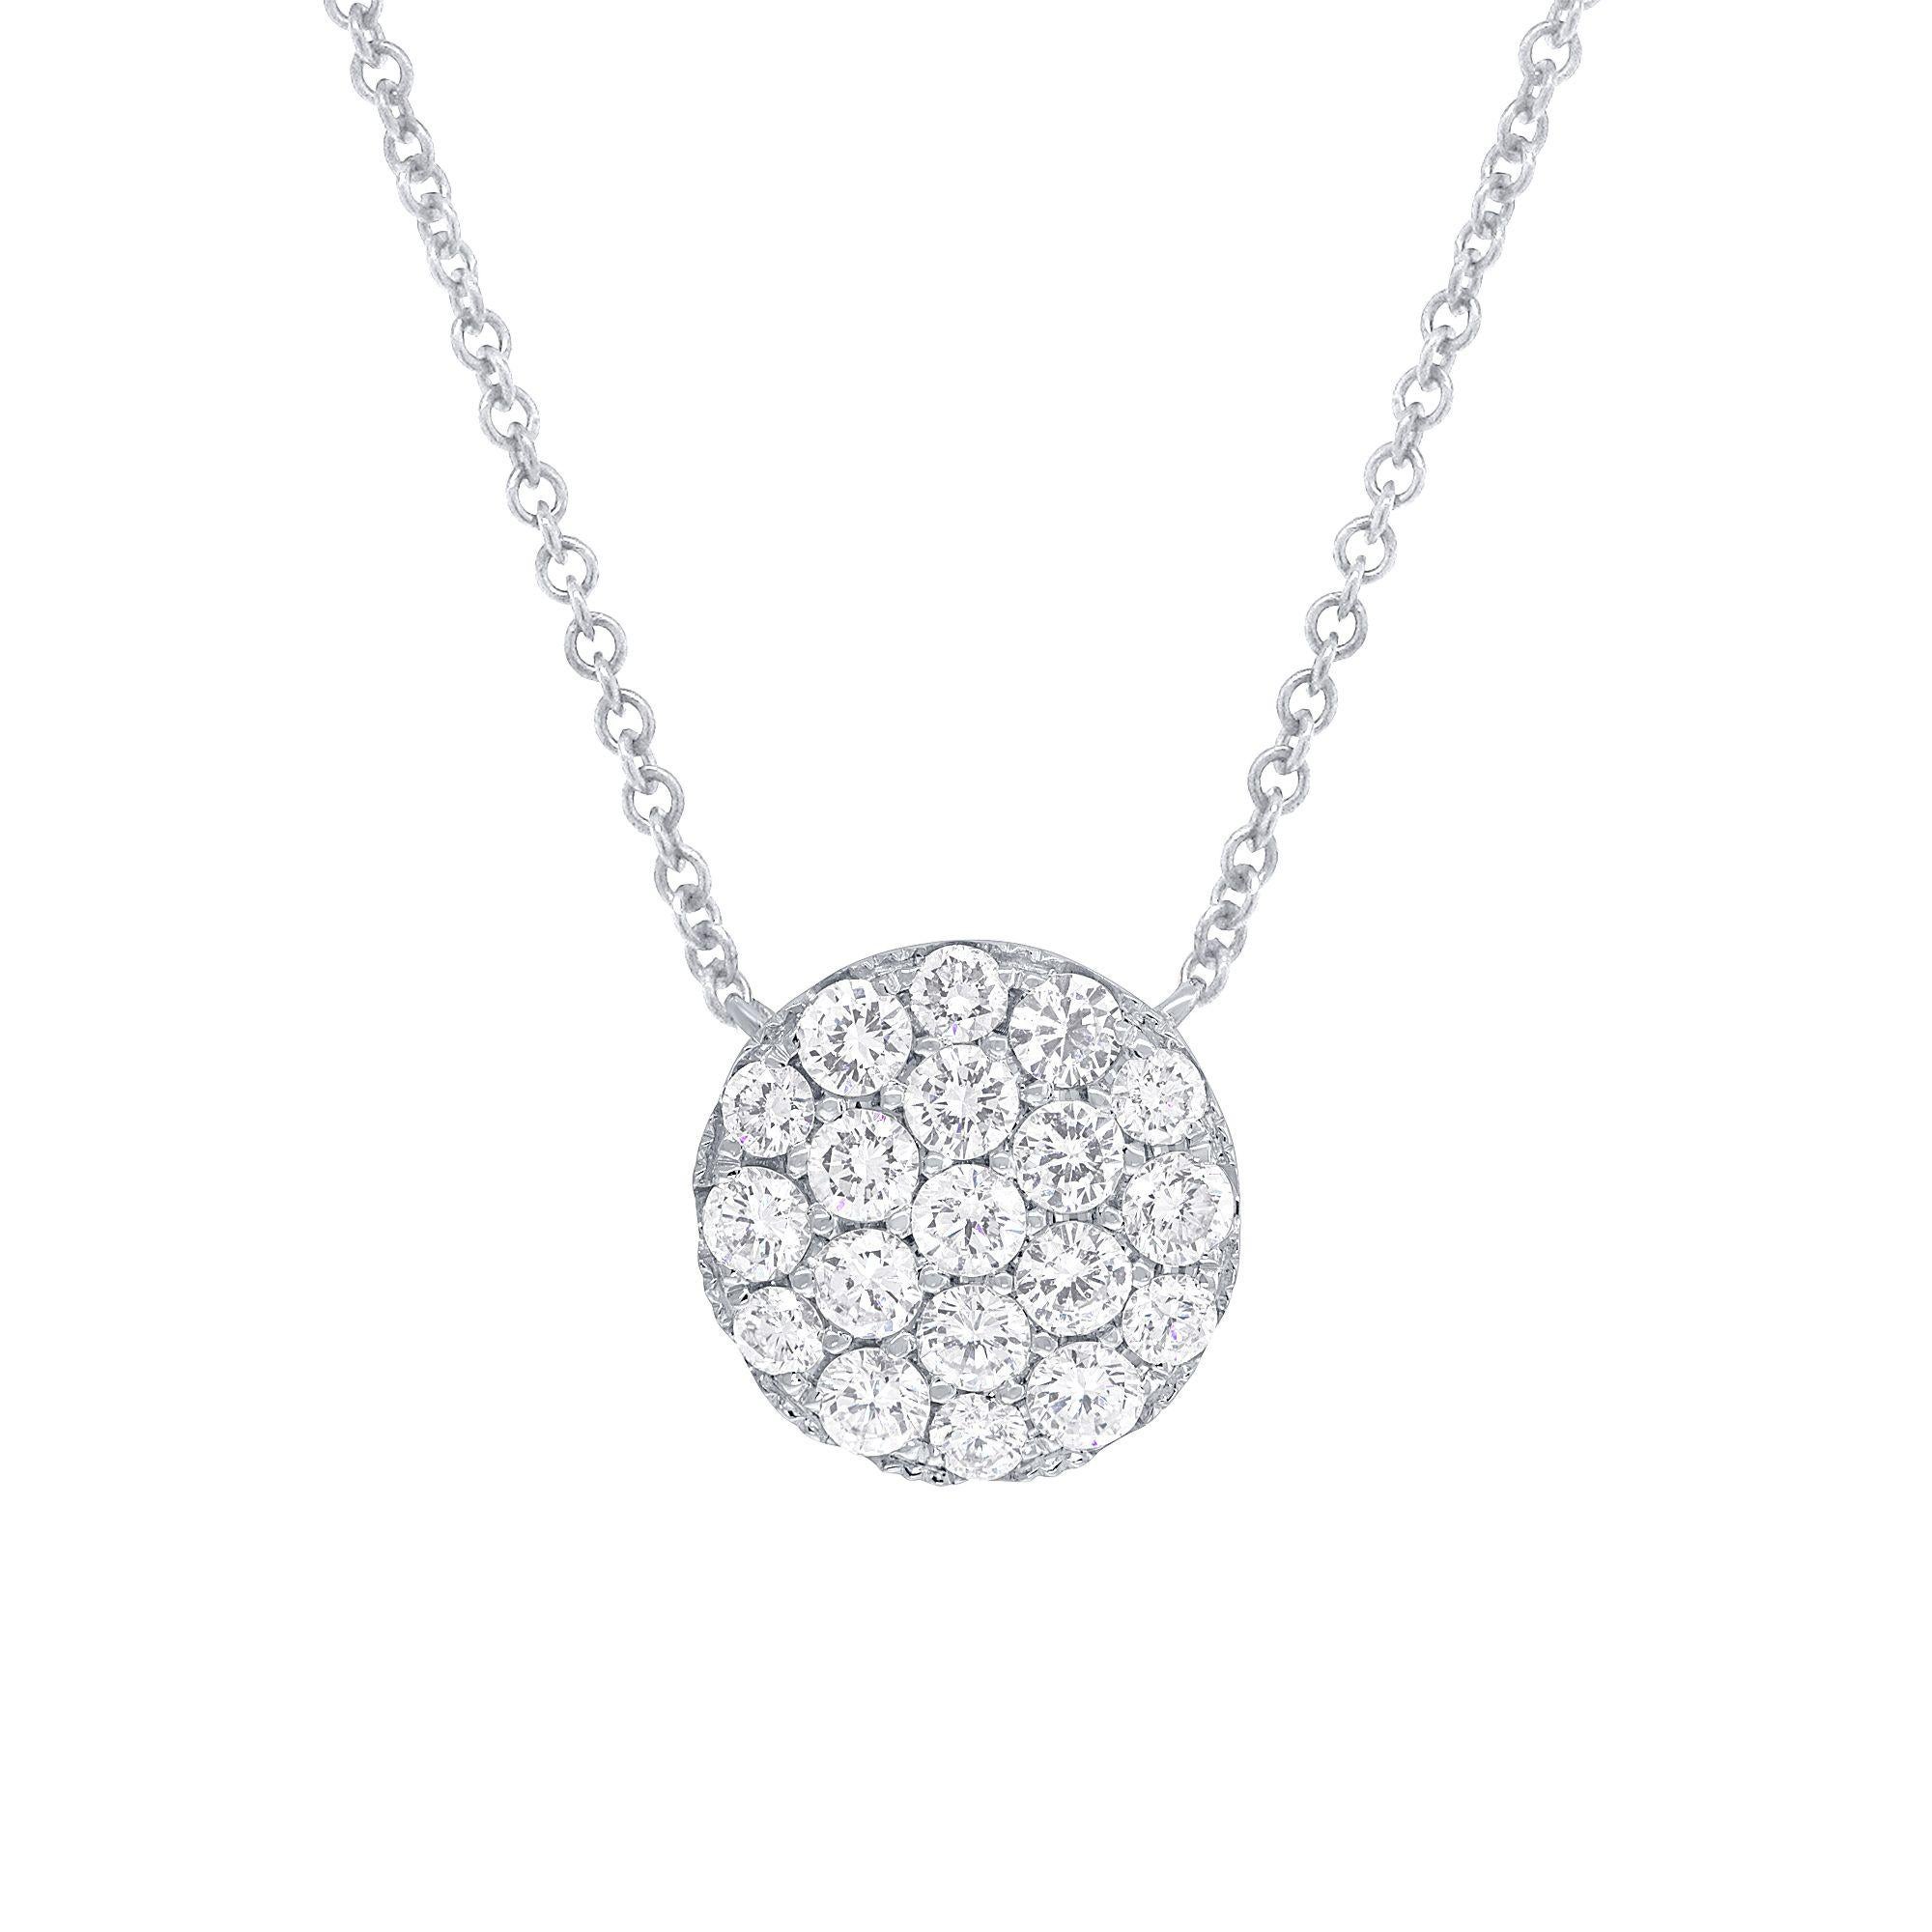 14 kt white gold diamond pendant with pave circle design adorned with 0.48 cts tw diamonds
Diana M. is a leading supplier of top-quality fine jewelry for over 35 years.
Diana M is one-stop shop for all your jewelry shopping, carrying line of diamond